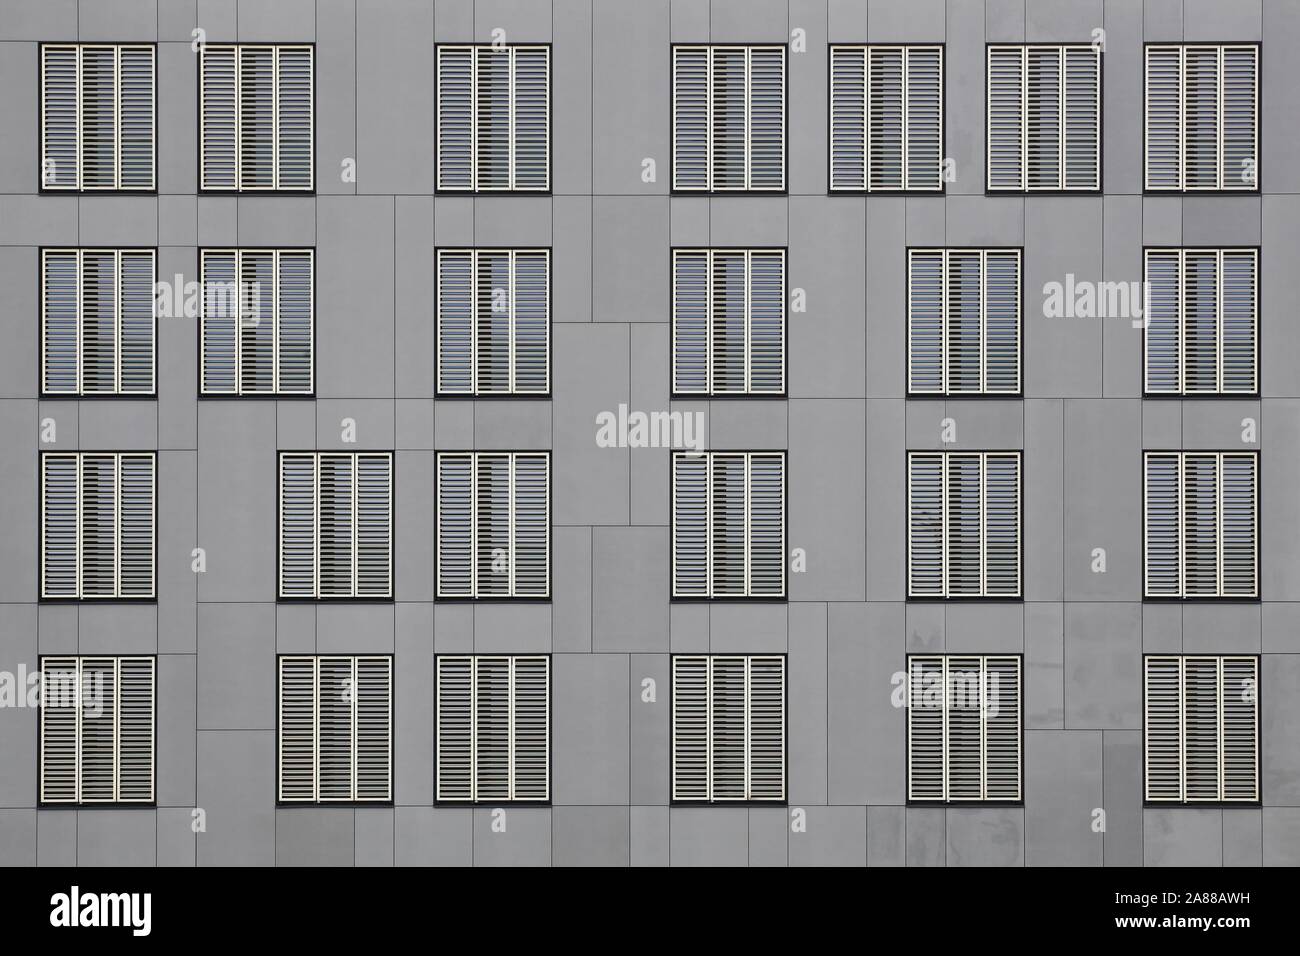 Esch sur Alzette, Luxembourg - March 8, 2015: Facade of Luxembourg Institute of Socio-Economic Research in Belval, Luxembourg Stock Photo